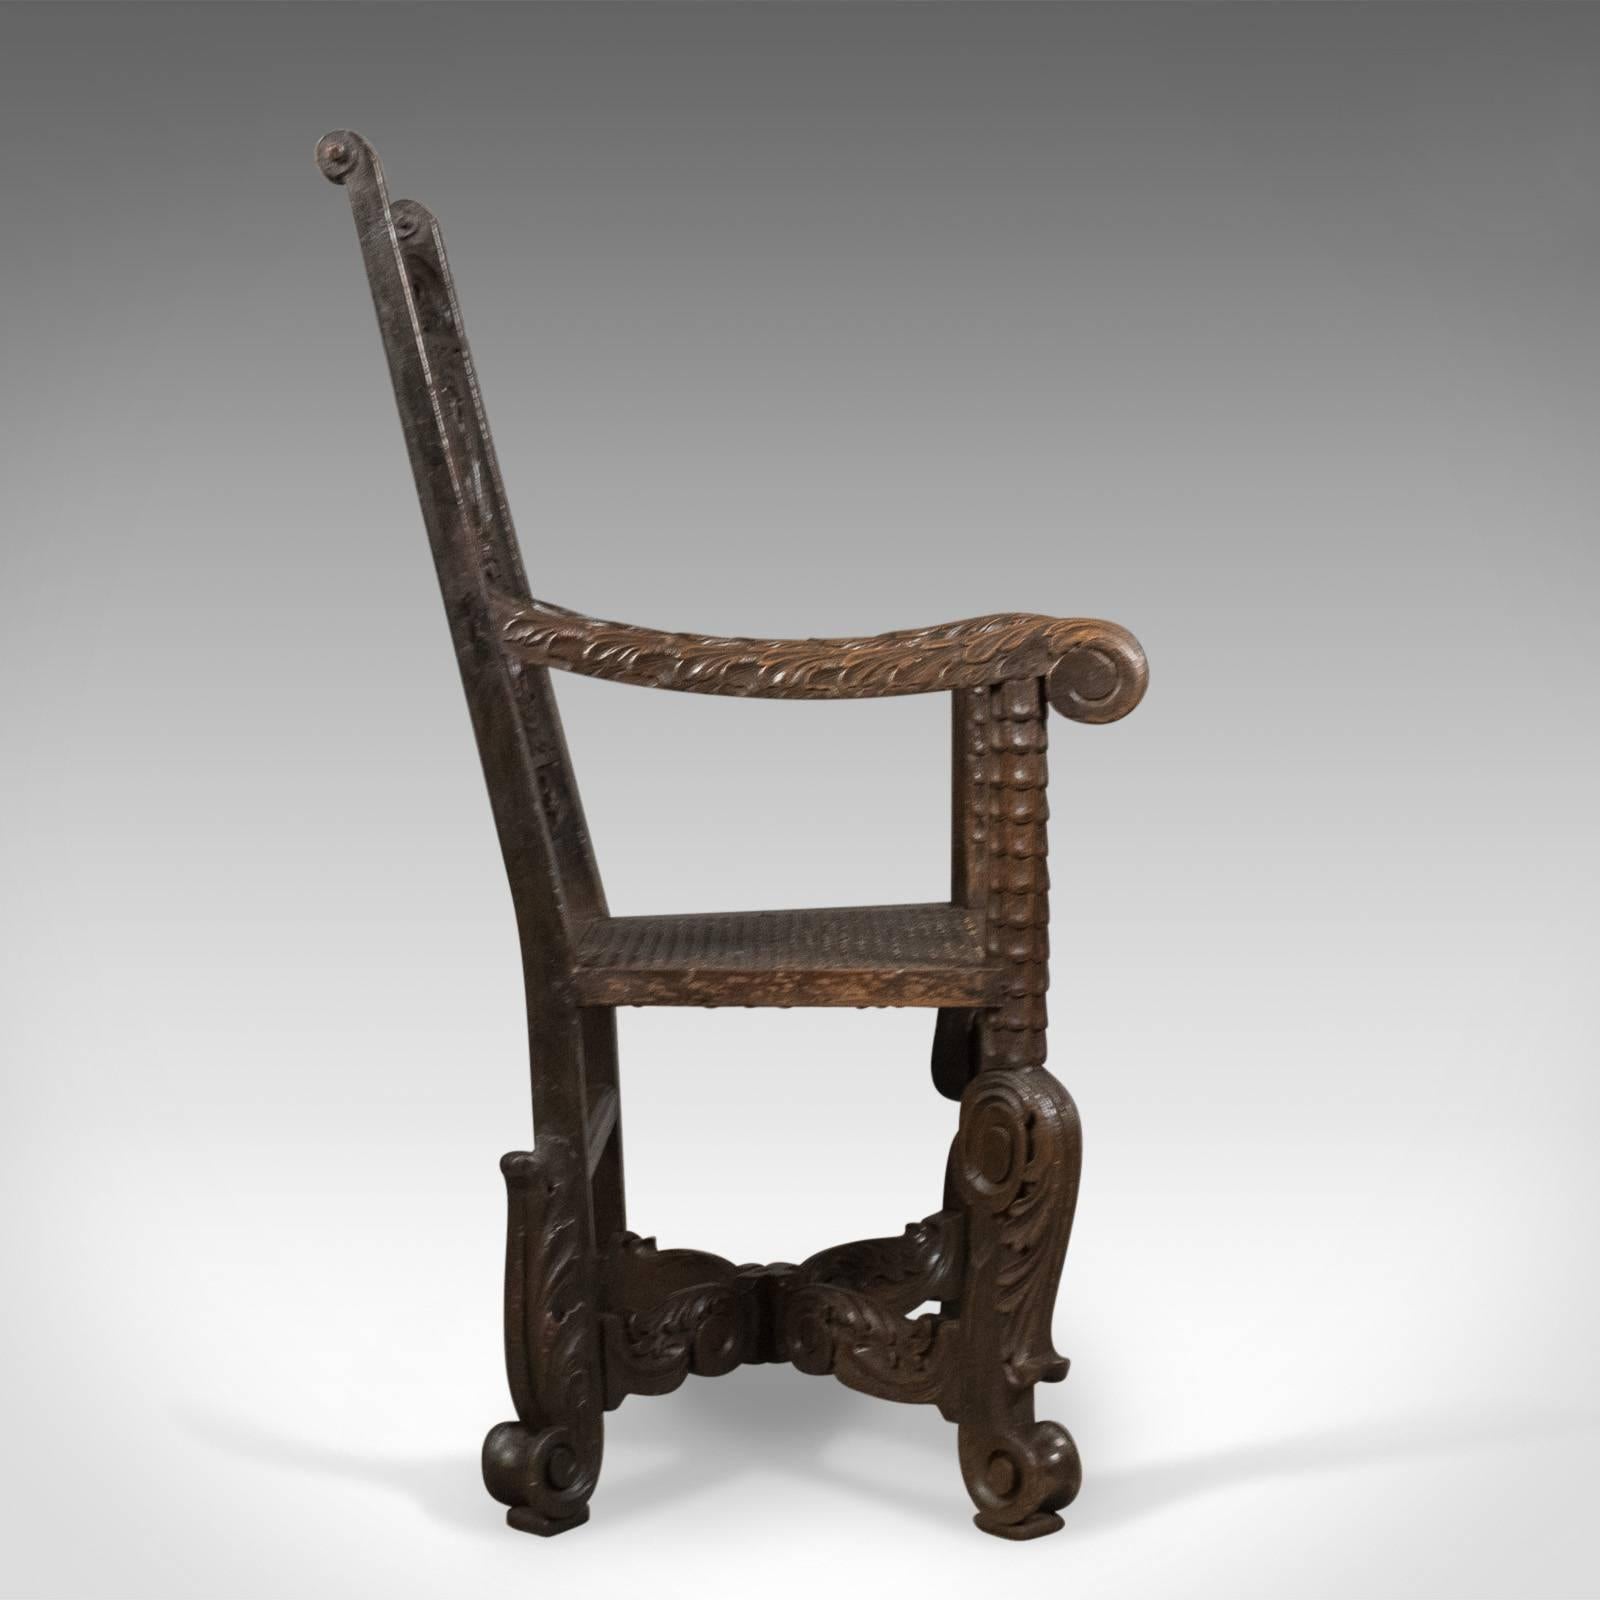 Gothic Revival Antique Armchair, Victorian Carved Side, Hall Chair, English, Oak, circa 1880